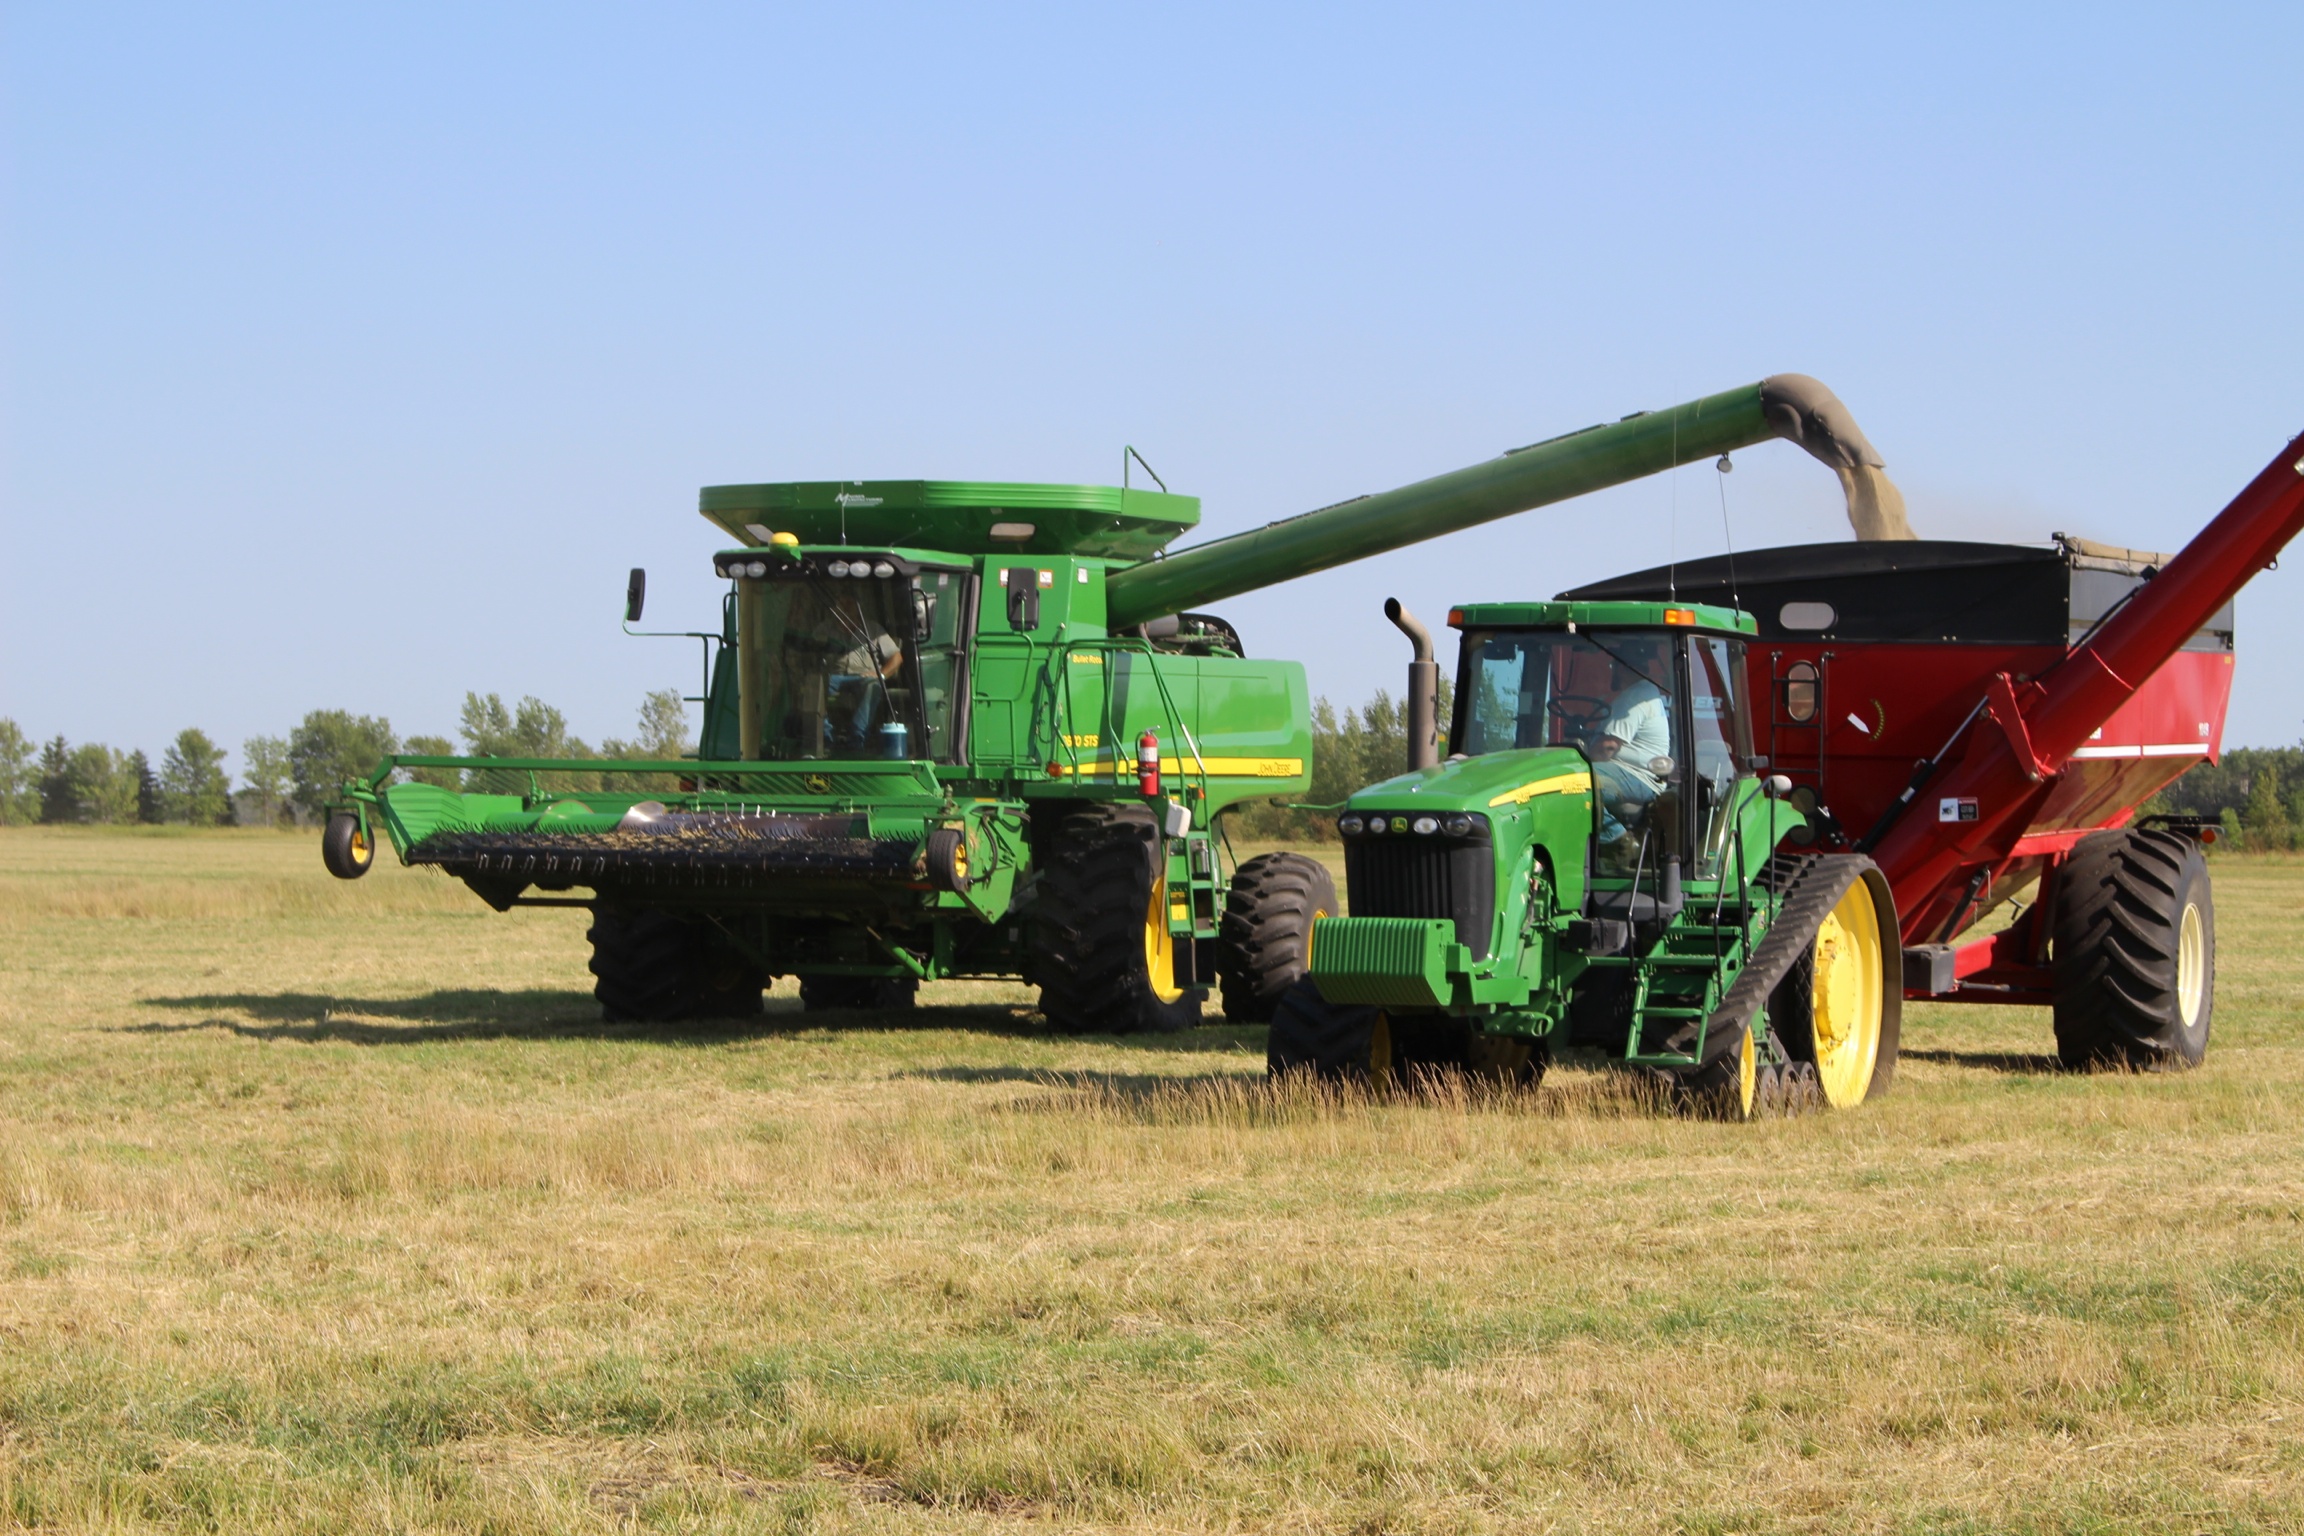 Combining swathed perennial ryegrass